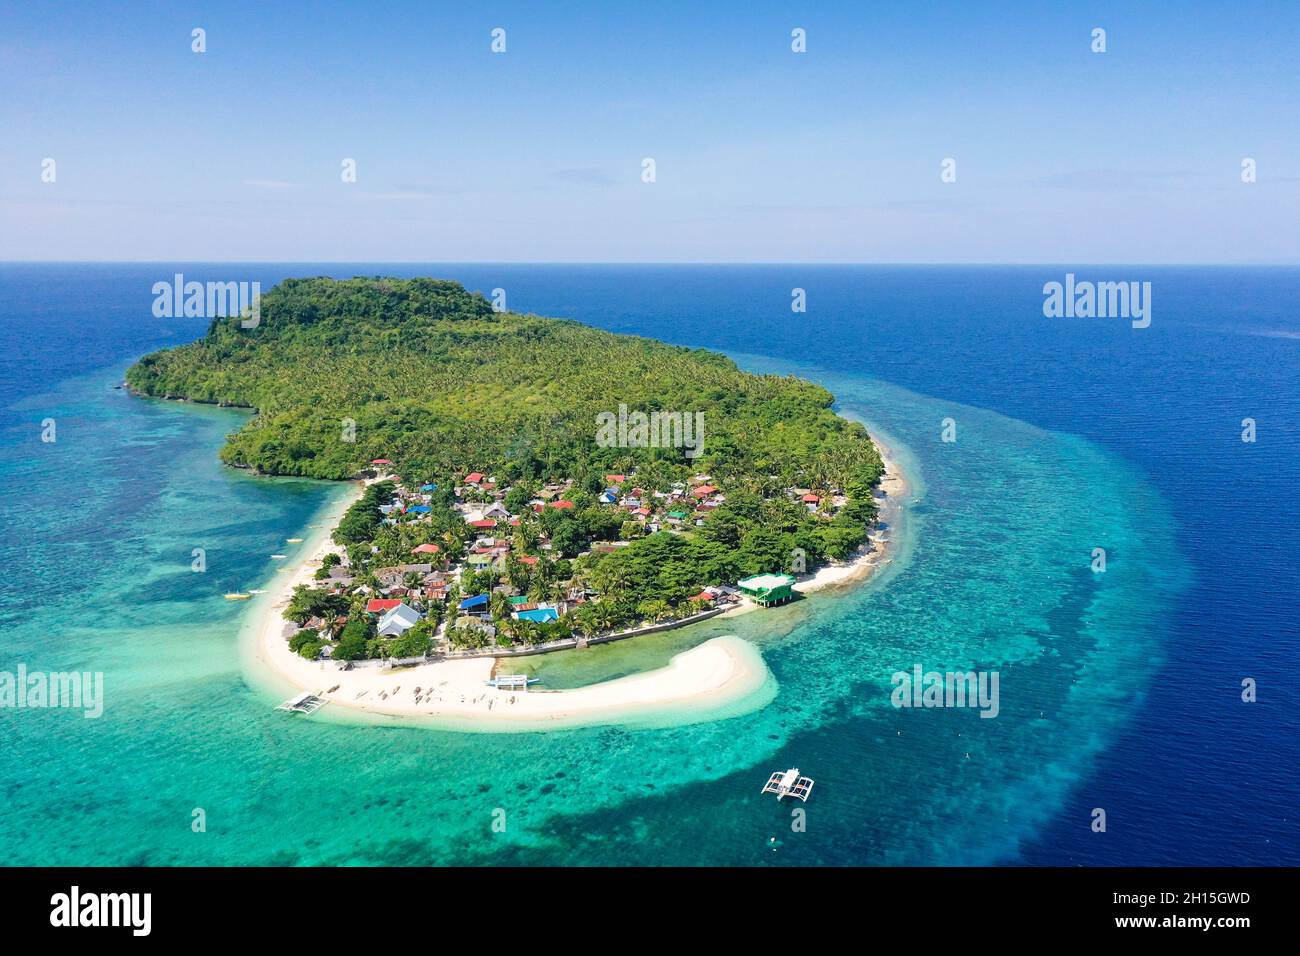 Himokilan Island, Leyte Island, Philippines. Tropical island with a village and a white beach. Turquoise water and coral reefs around the island. Summ Stock Photo